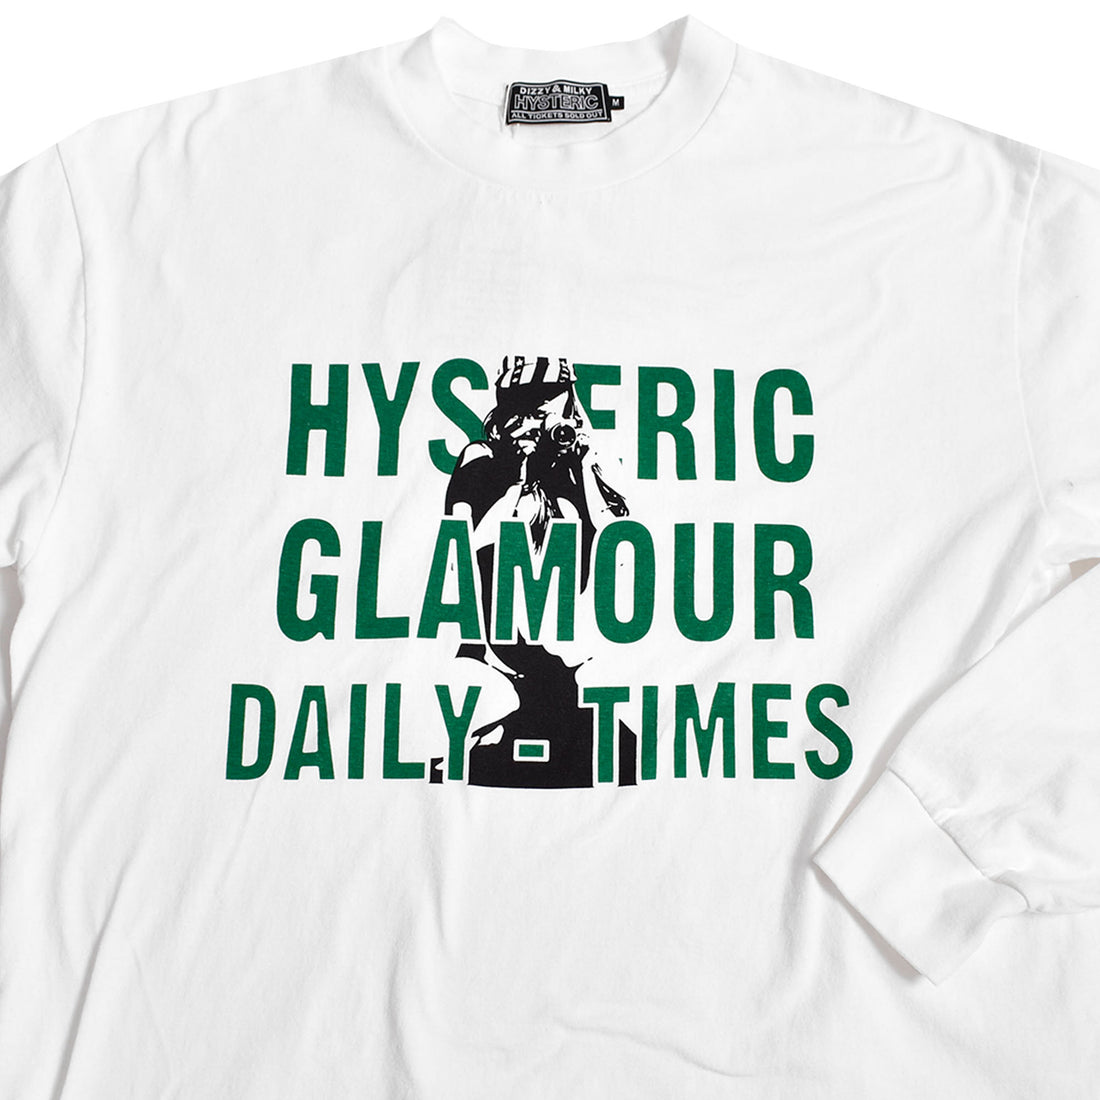 [HYSTERIC GLAMOUR]DAILY HYSTERIC Tシャツ/WHITE(02231CL03)